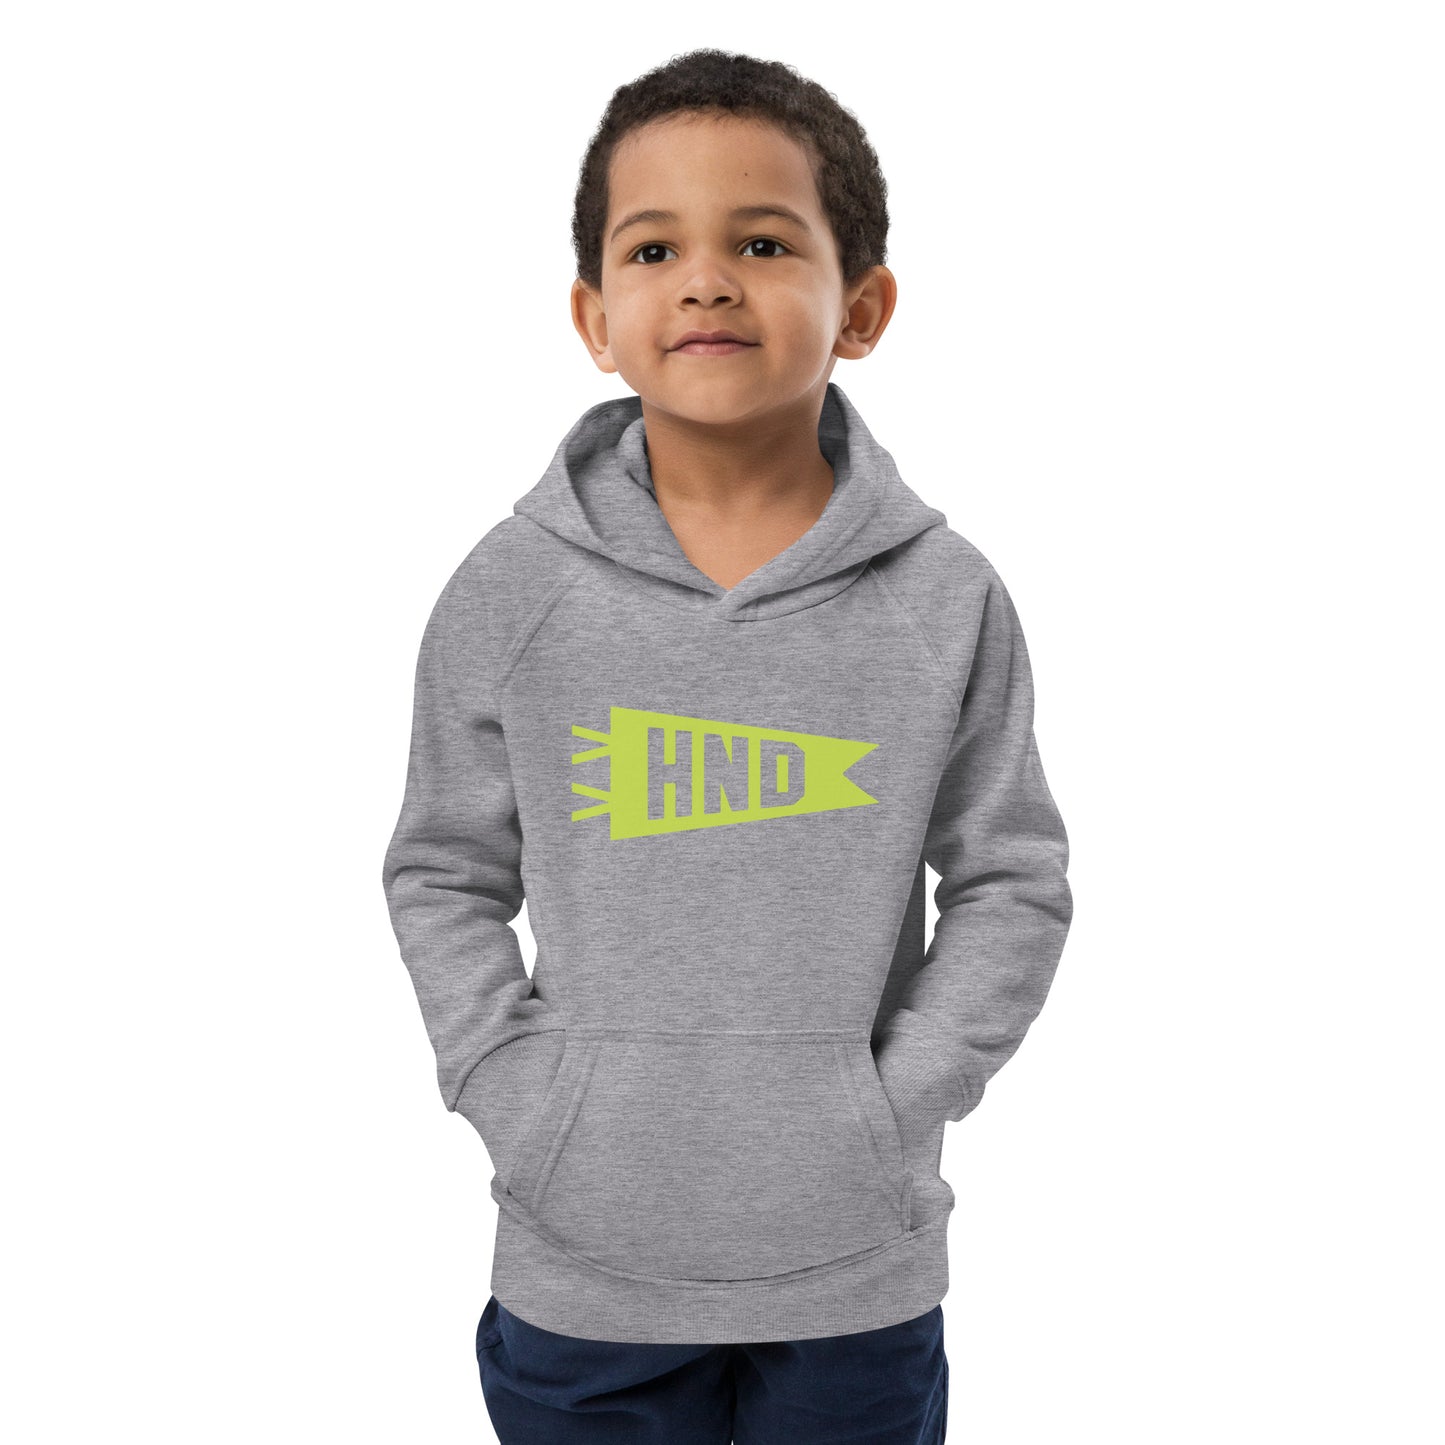 Kid's Sustainable Hoodie - Green Graphic • HND Tokyo • YHM Designs - Image 11